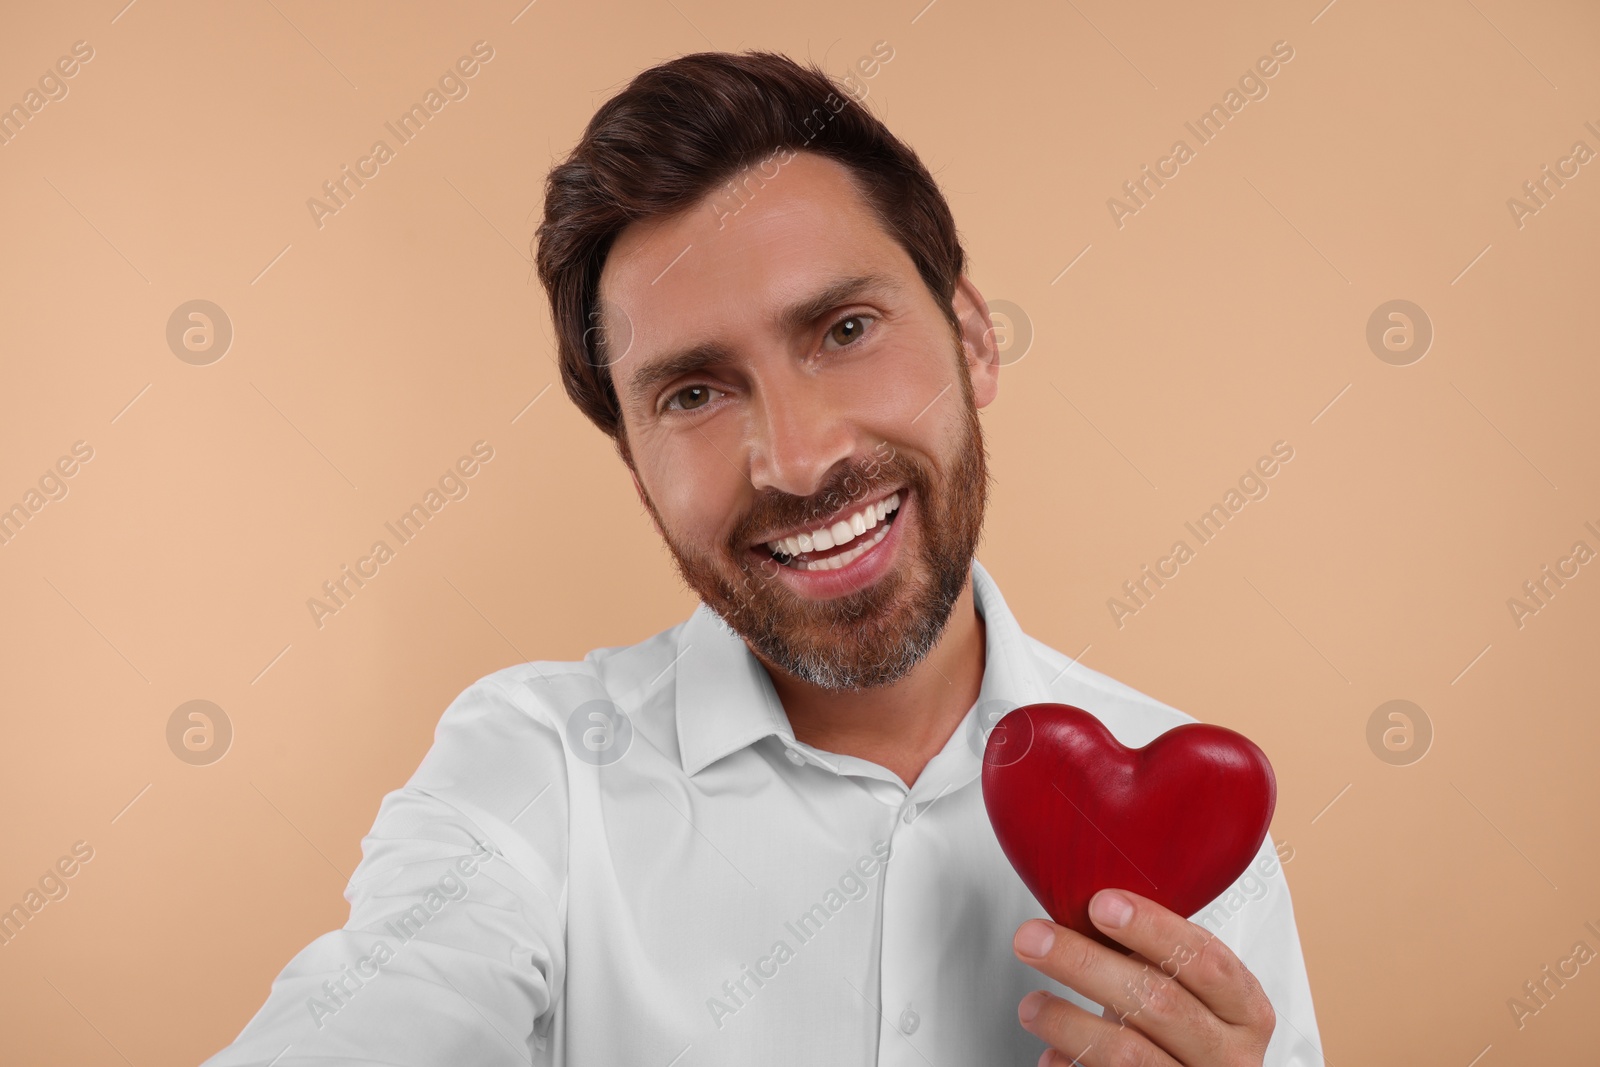 Photo of Happy man holding red heart and taking selfie on beige background